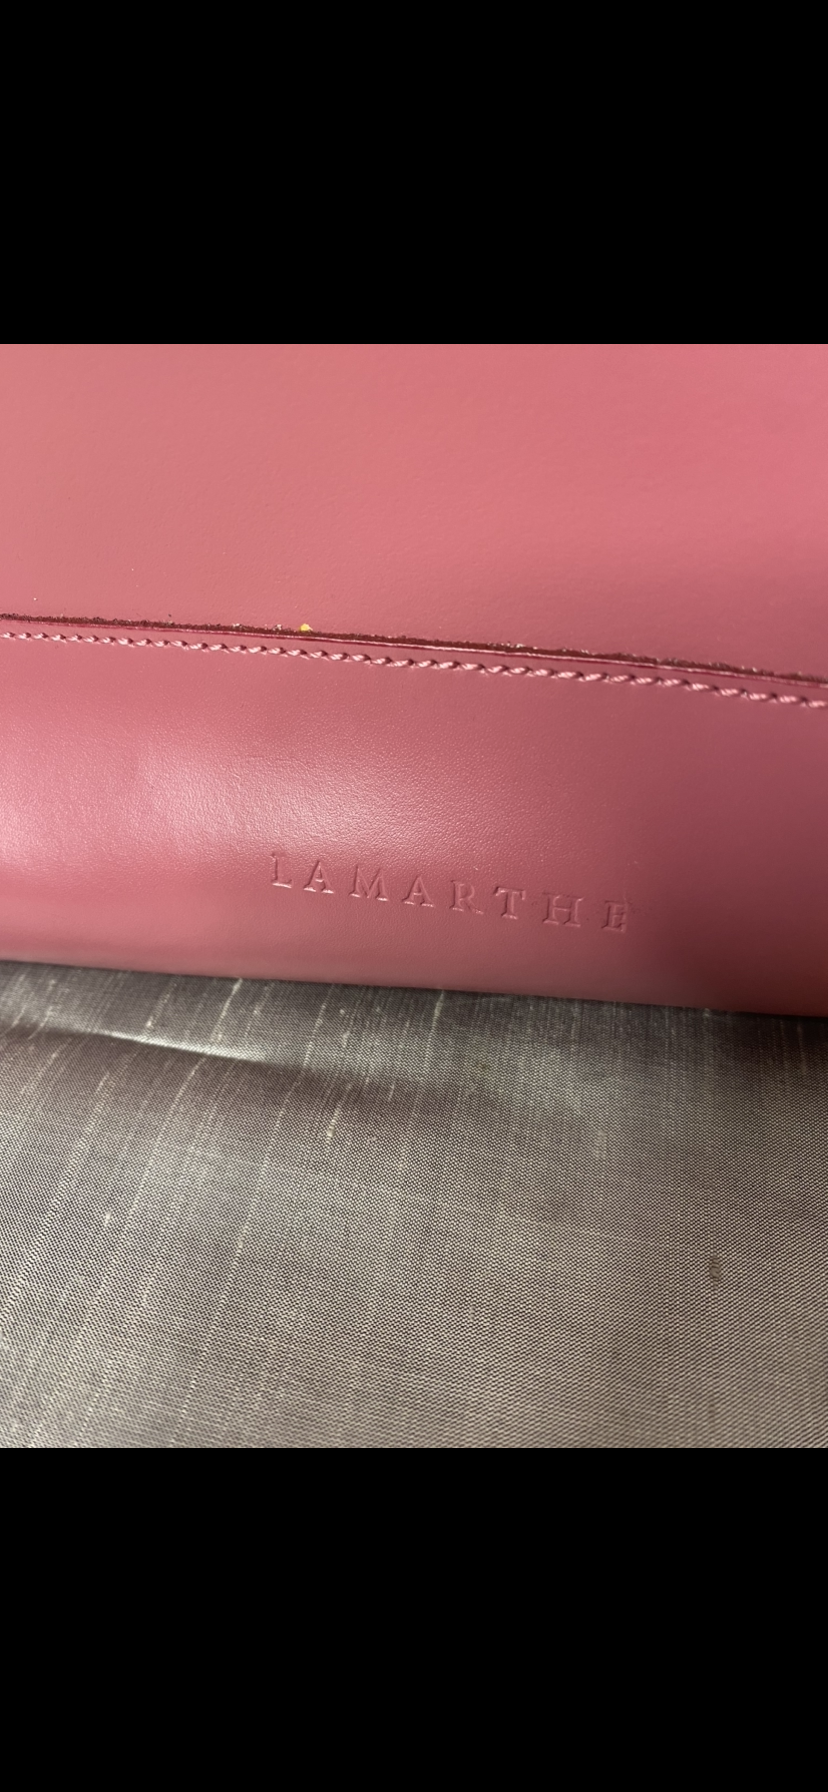 Pink smooth purse by Lamarthe